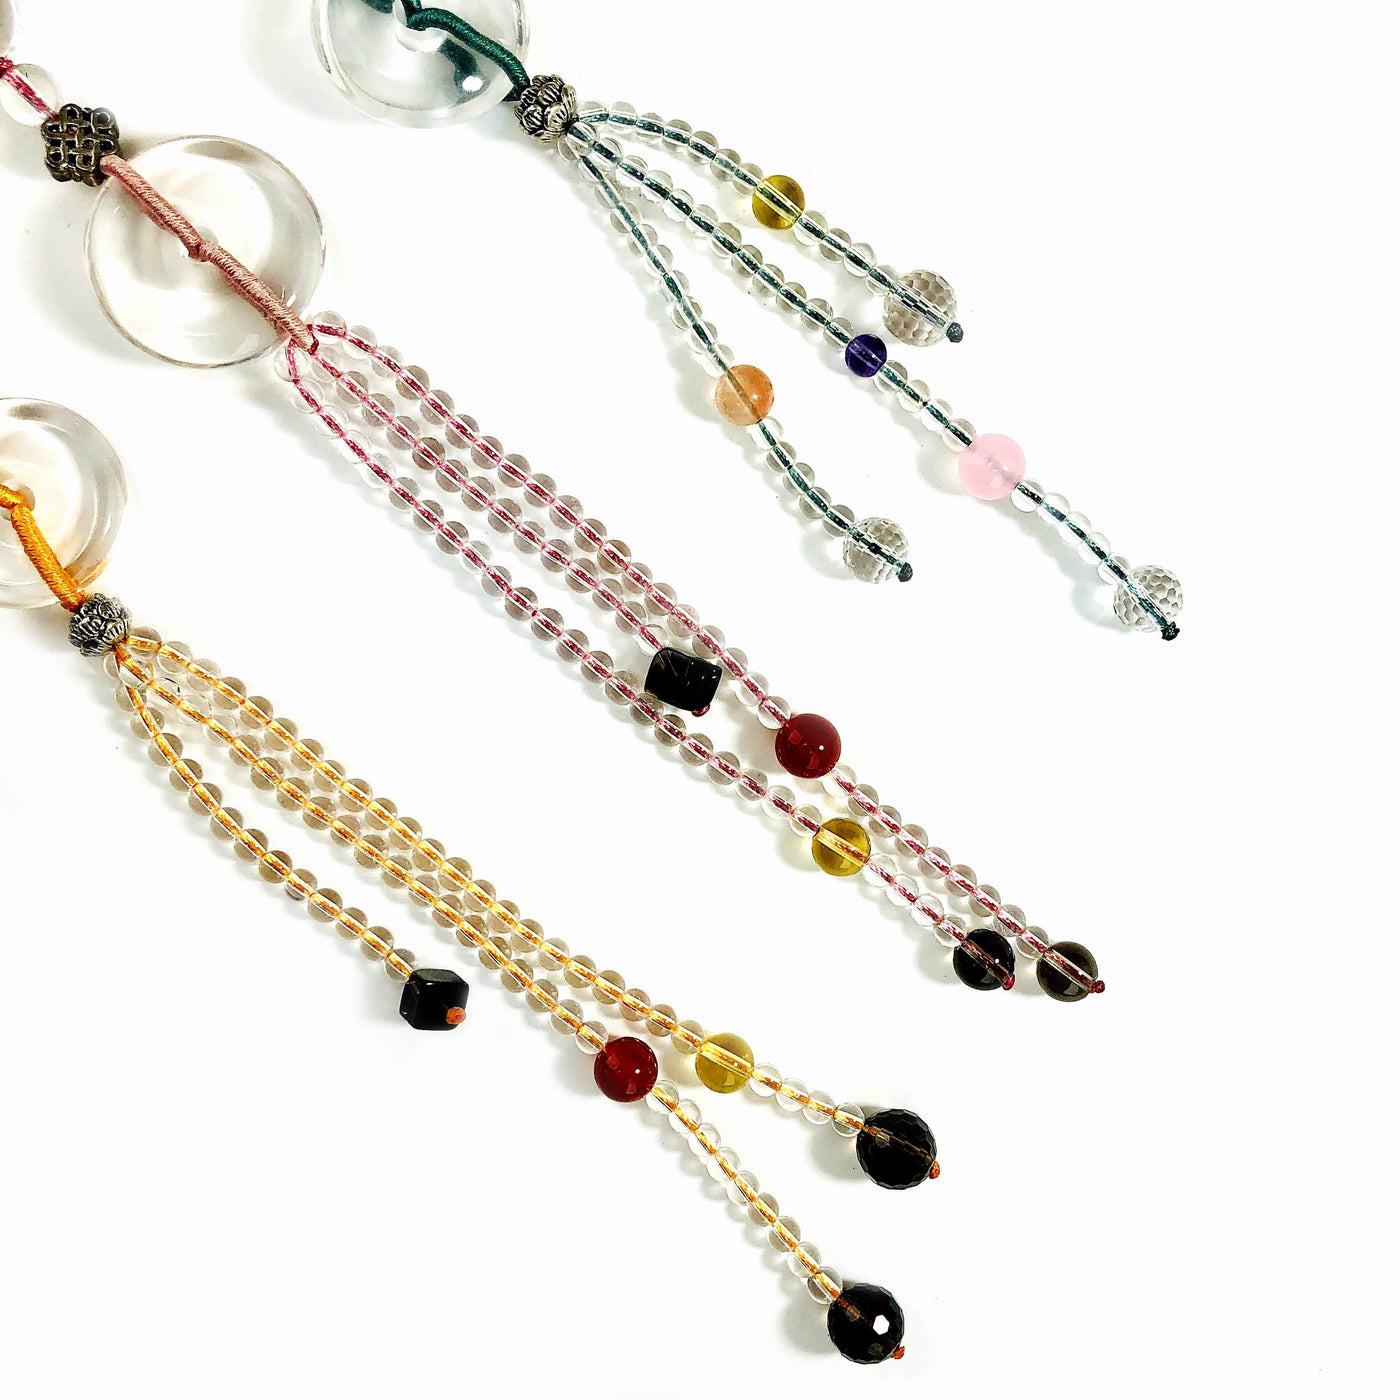 3 Colored Tassels with Assorted Stone Beads on white background